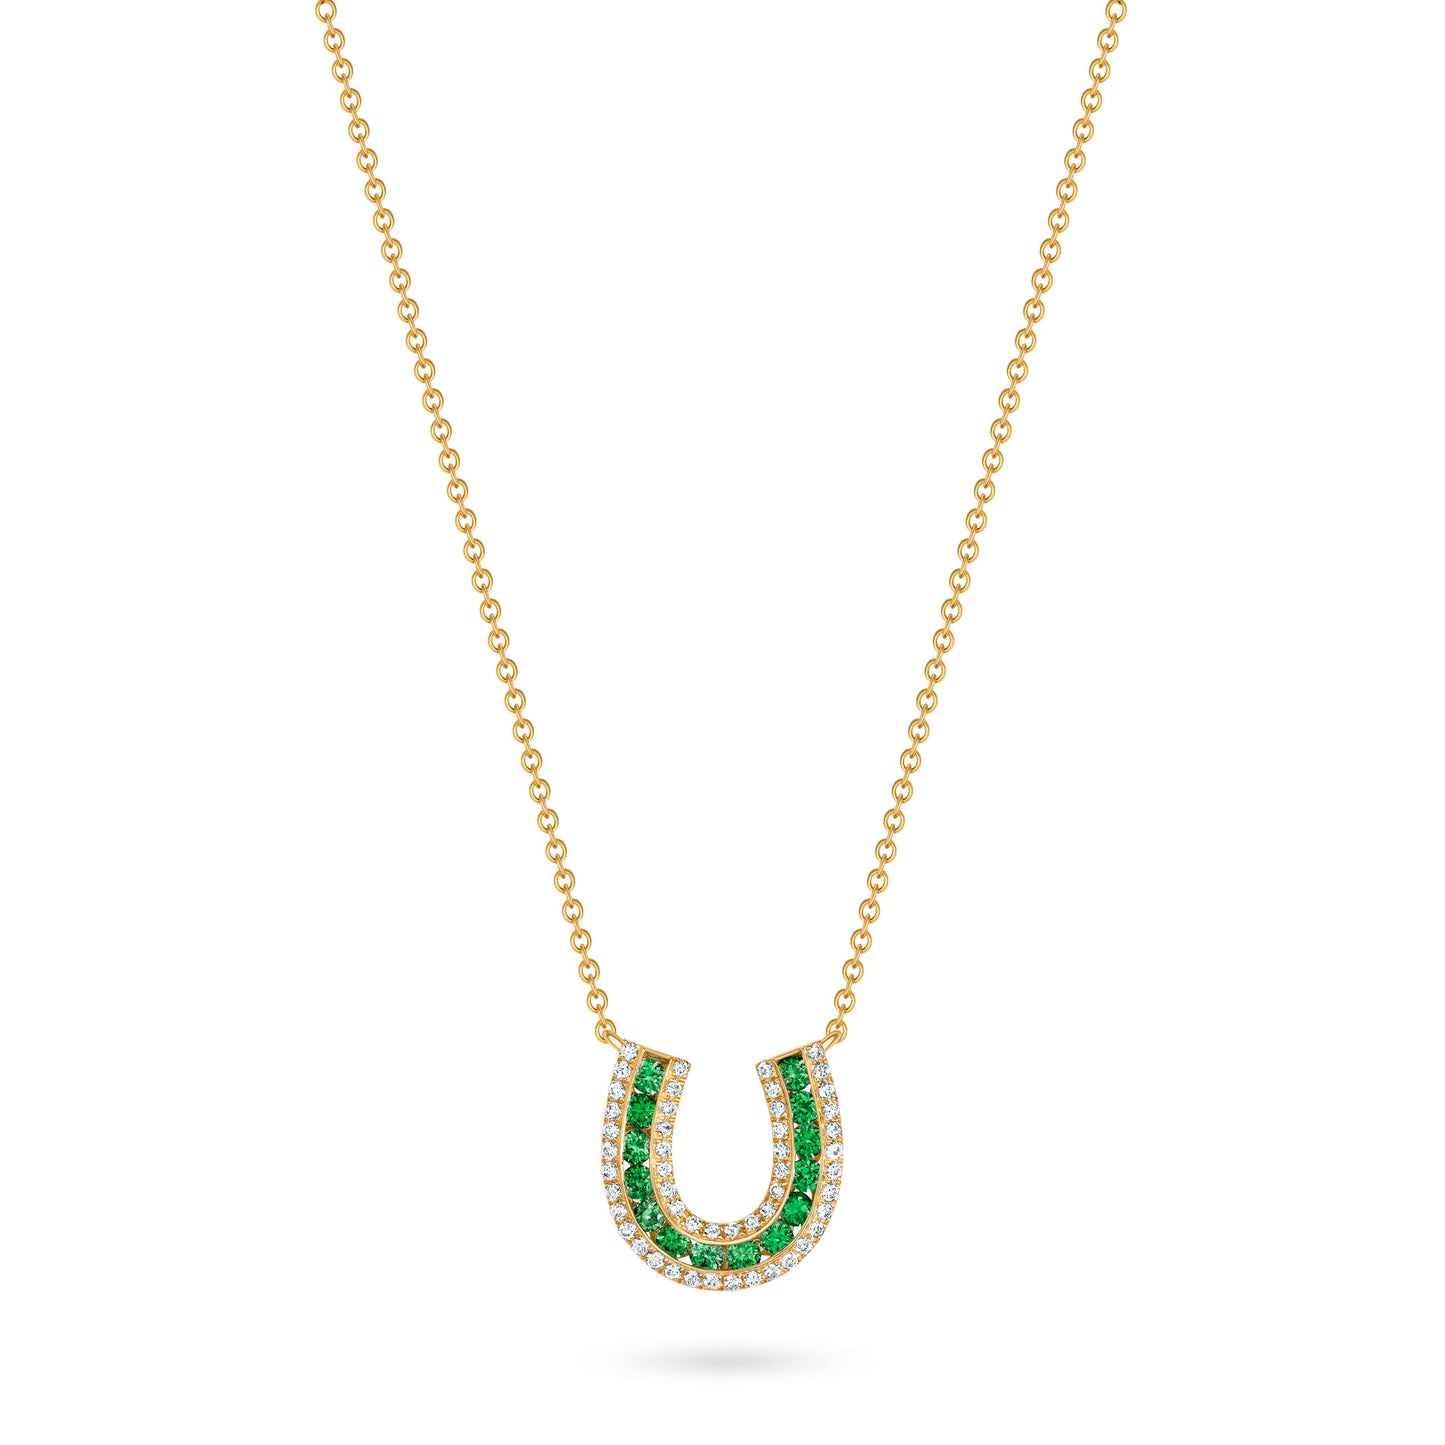 Lucky Horseshoe Necklace with Emeralds and Diamonds